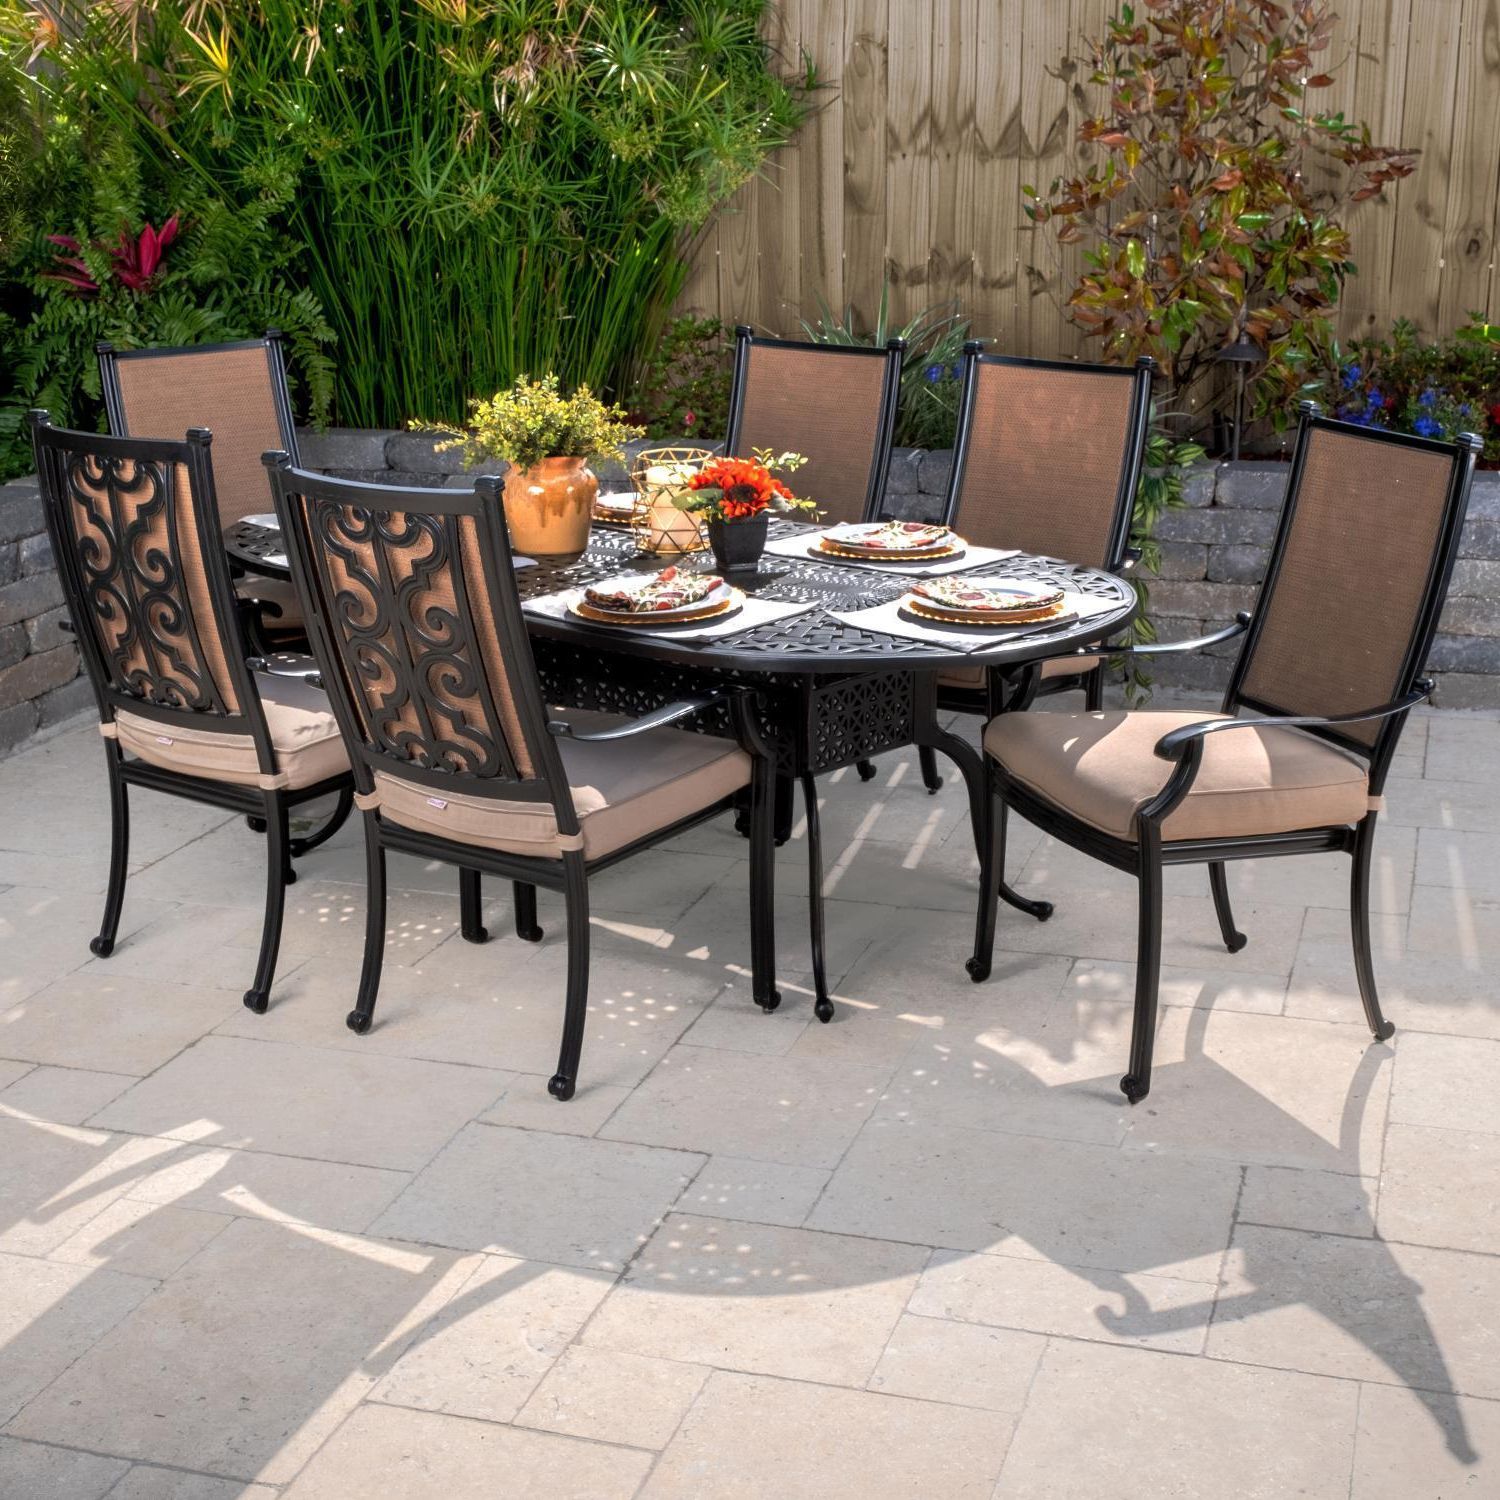 Bocage 7 Piece Cast Aluminum Sling Patio Dining Set W/ 84 X 42 Inch For Well Known 7 Piece Patio Dining Sets With Cushions (View 3 of 15)